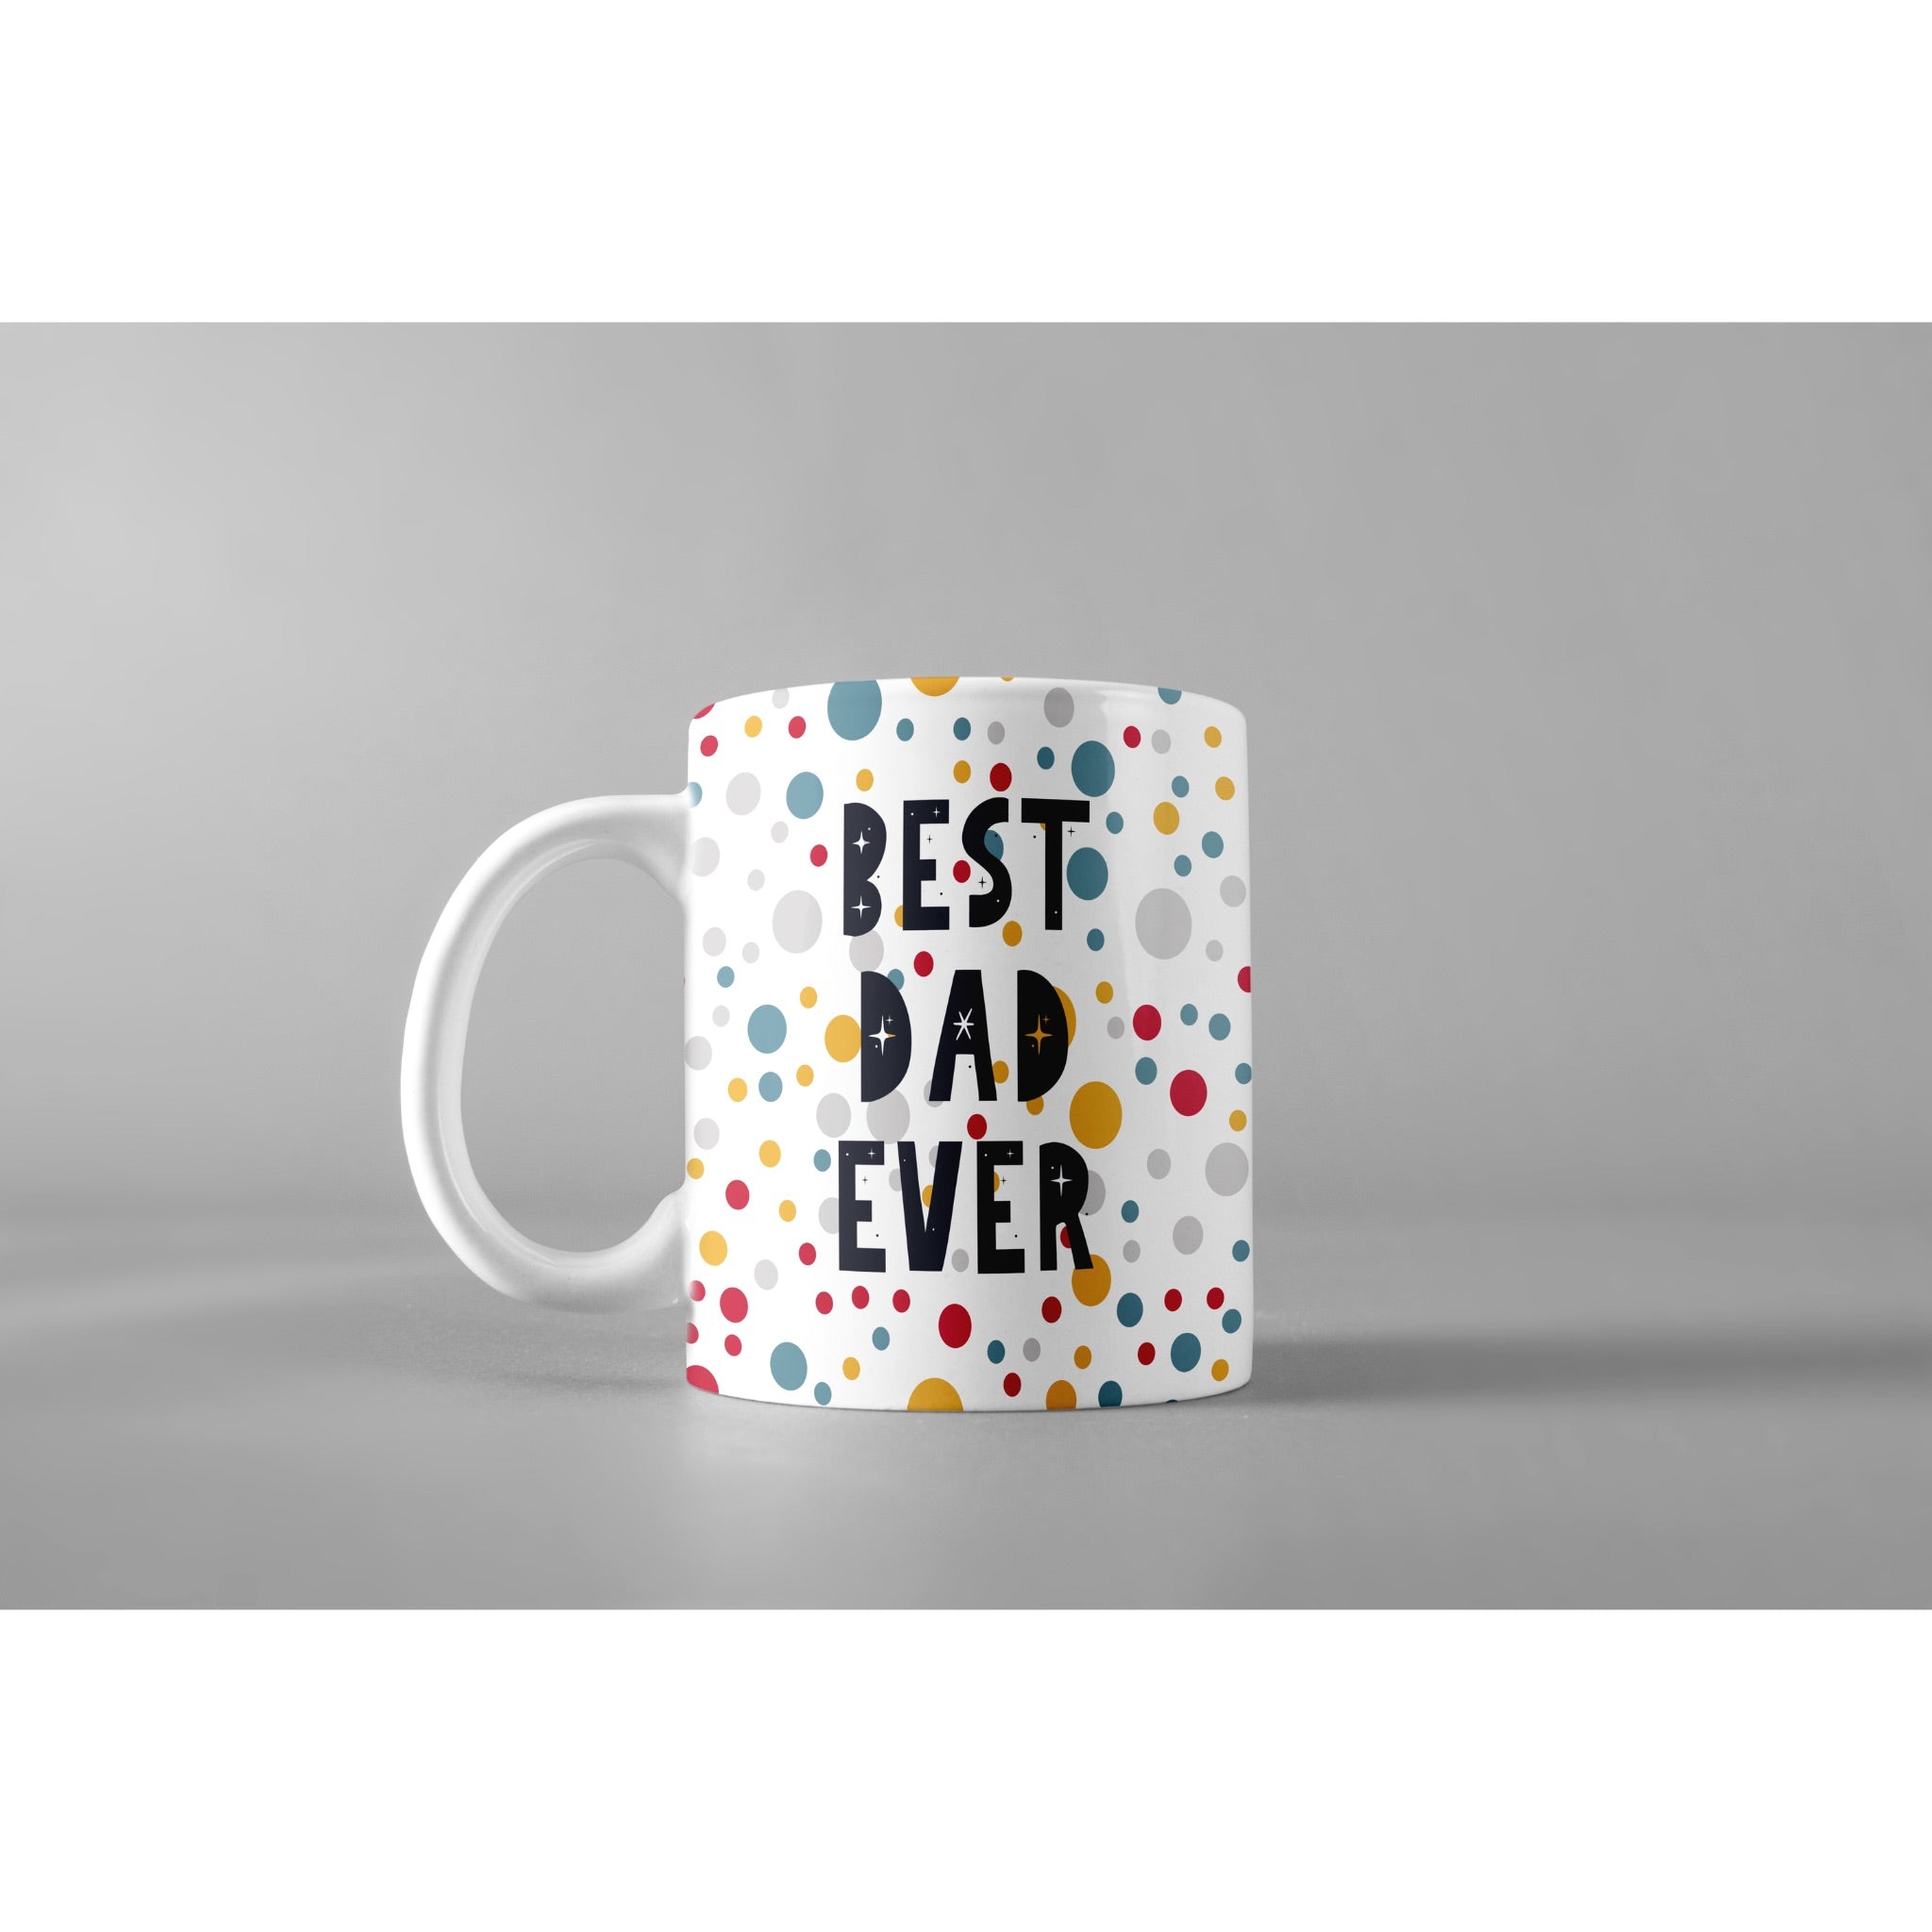 Best dad ever polka dots-- Mugs for Father